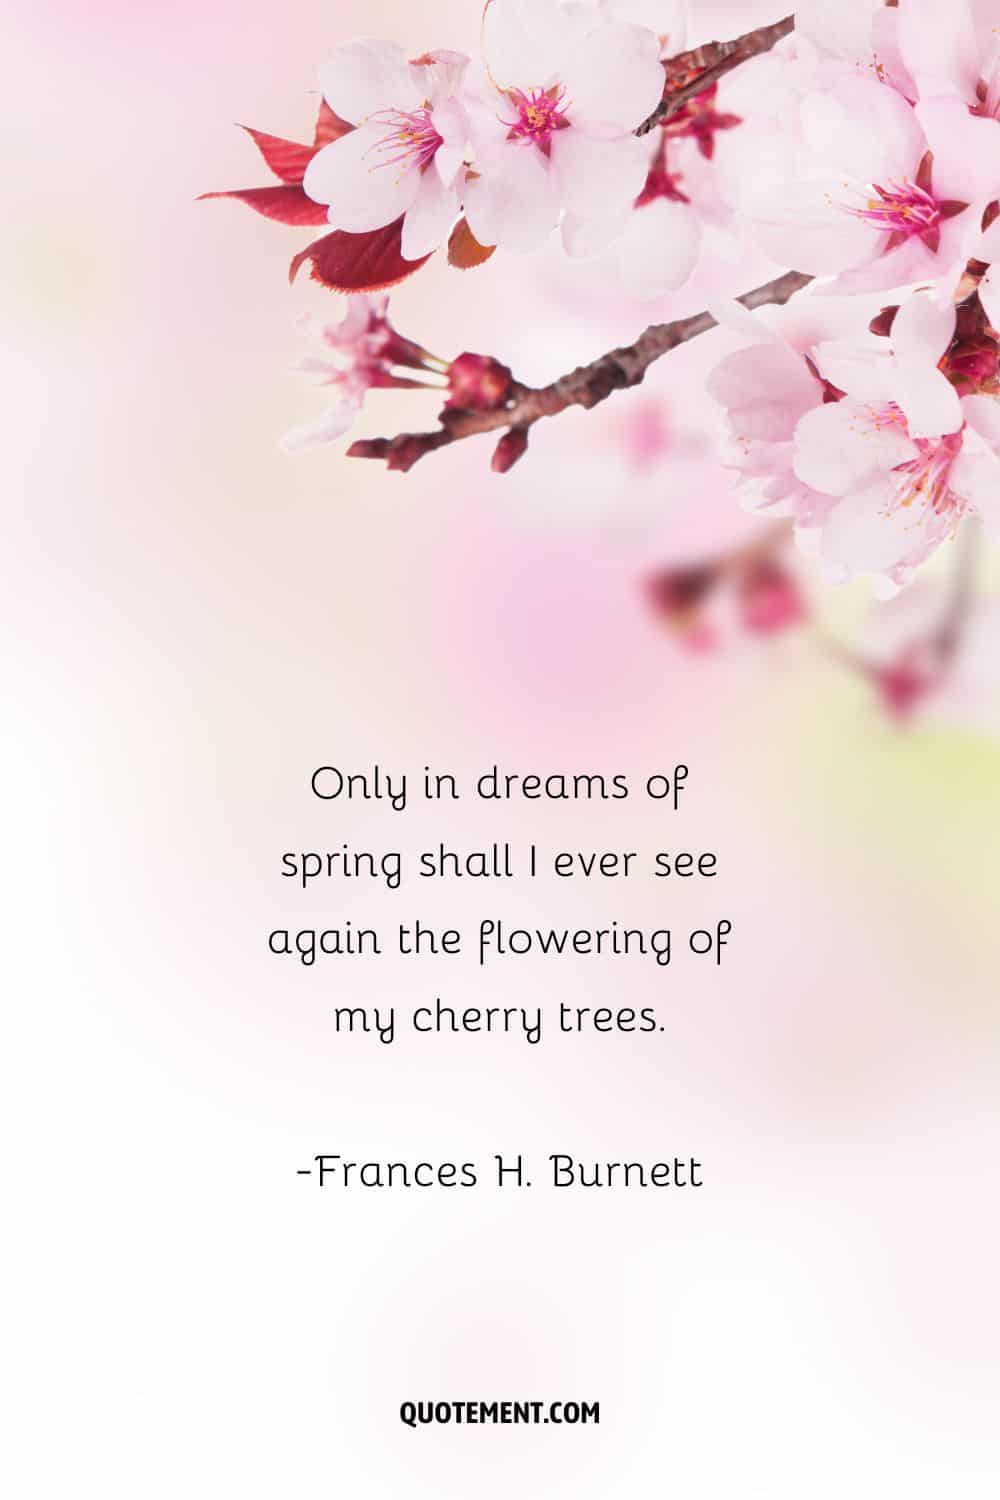 Quote about sakura and cherry blossom in the background.